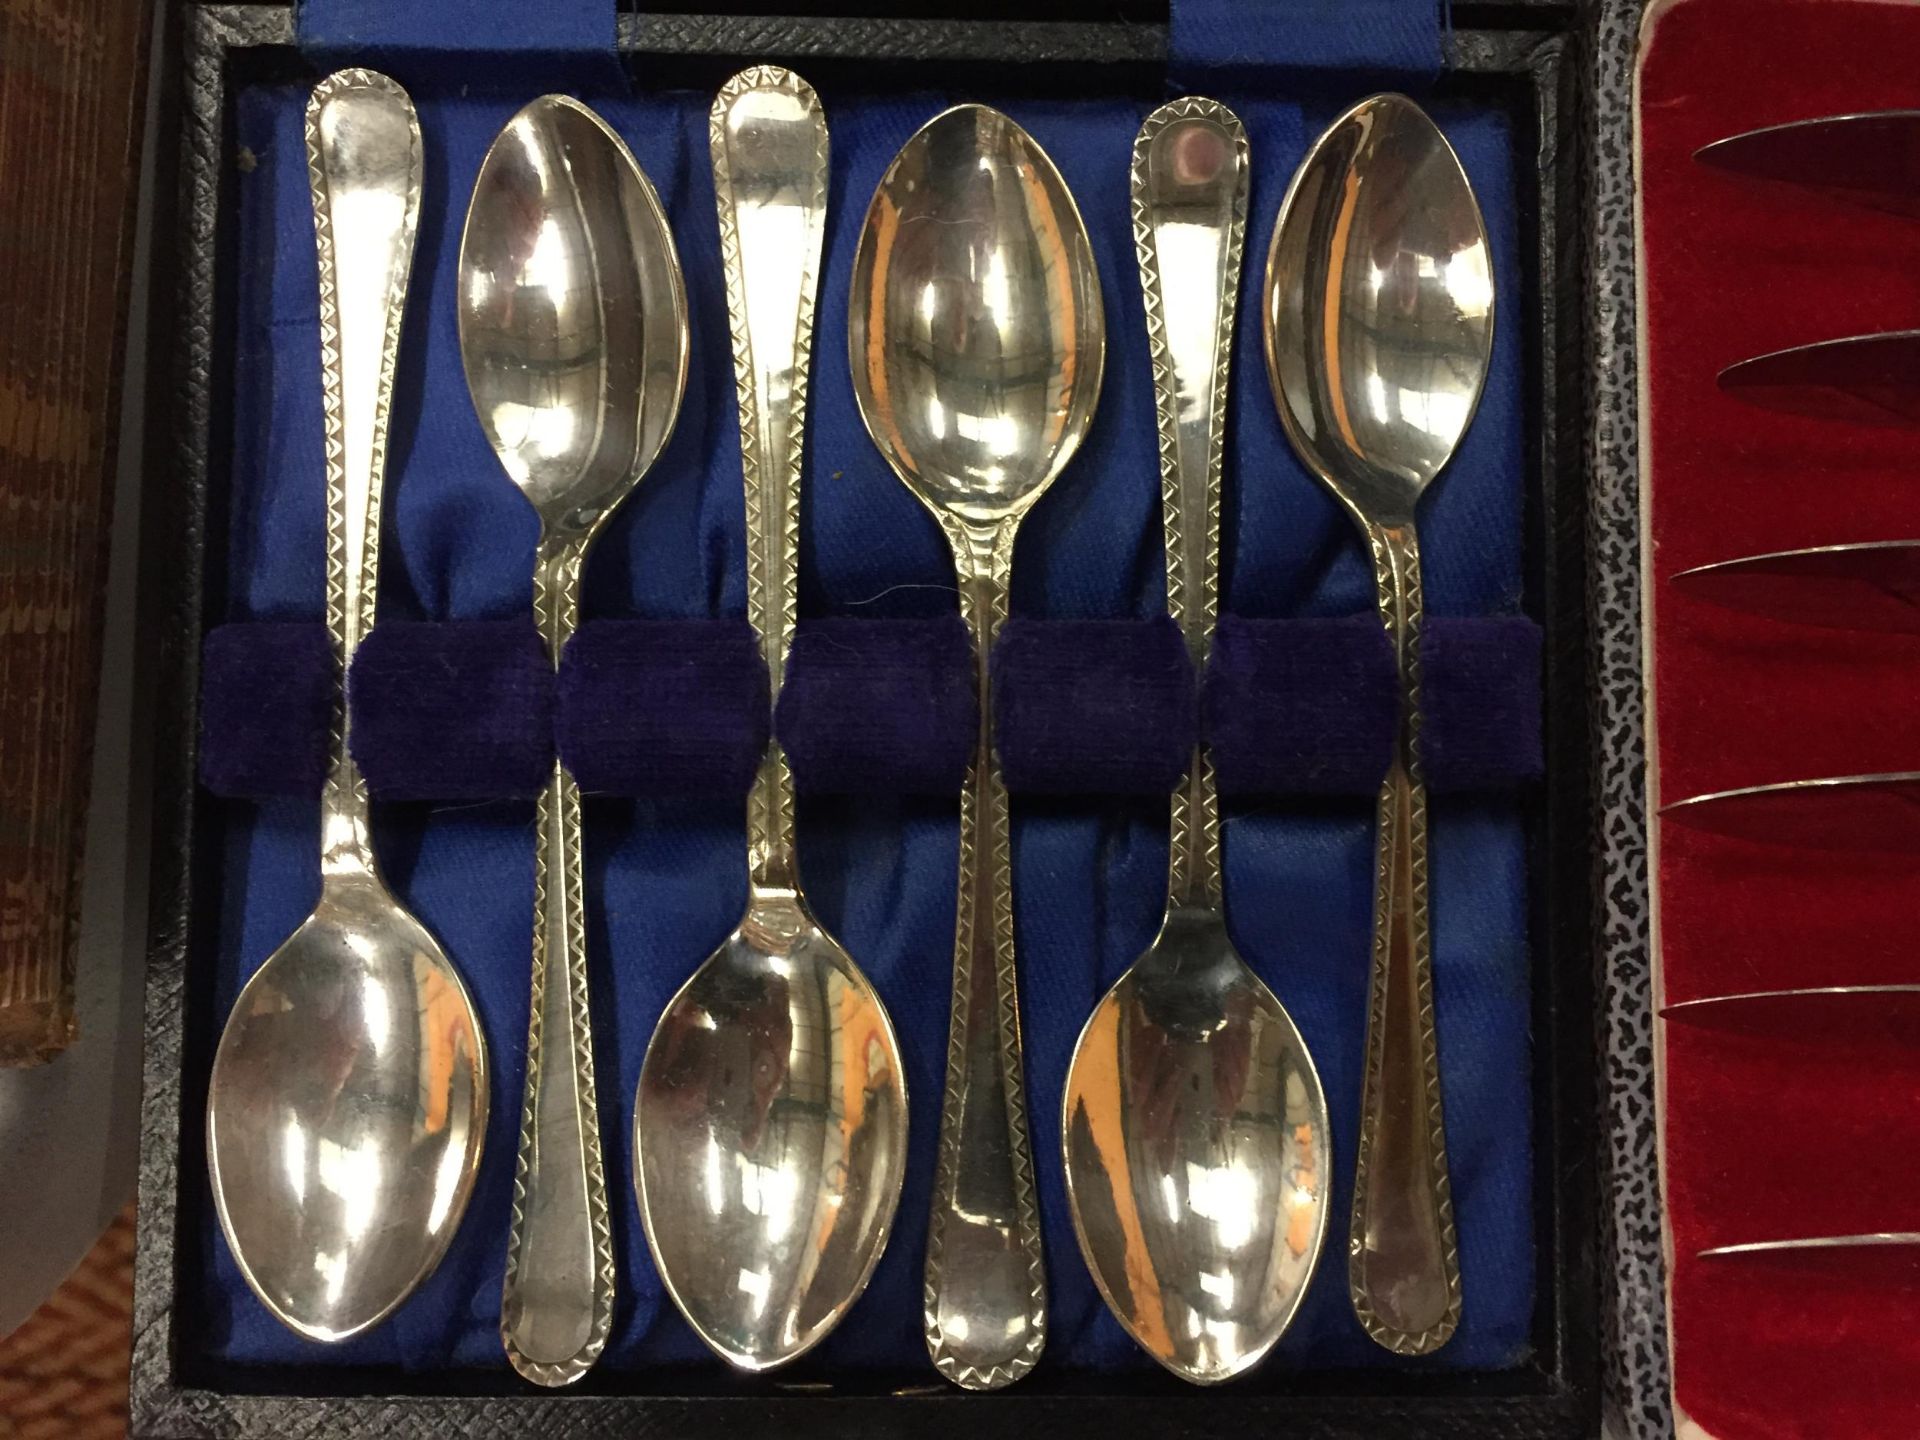 THREE BOXES OF FLATWARE TO INCLUDE KNIVES, FORKS AND TEASPOONS - Image 3 of 4